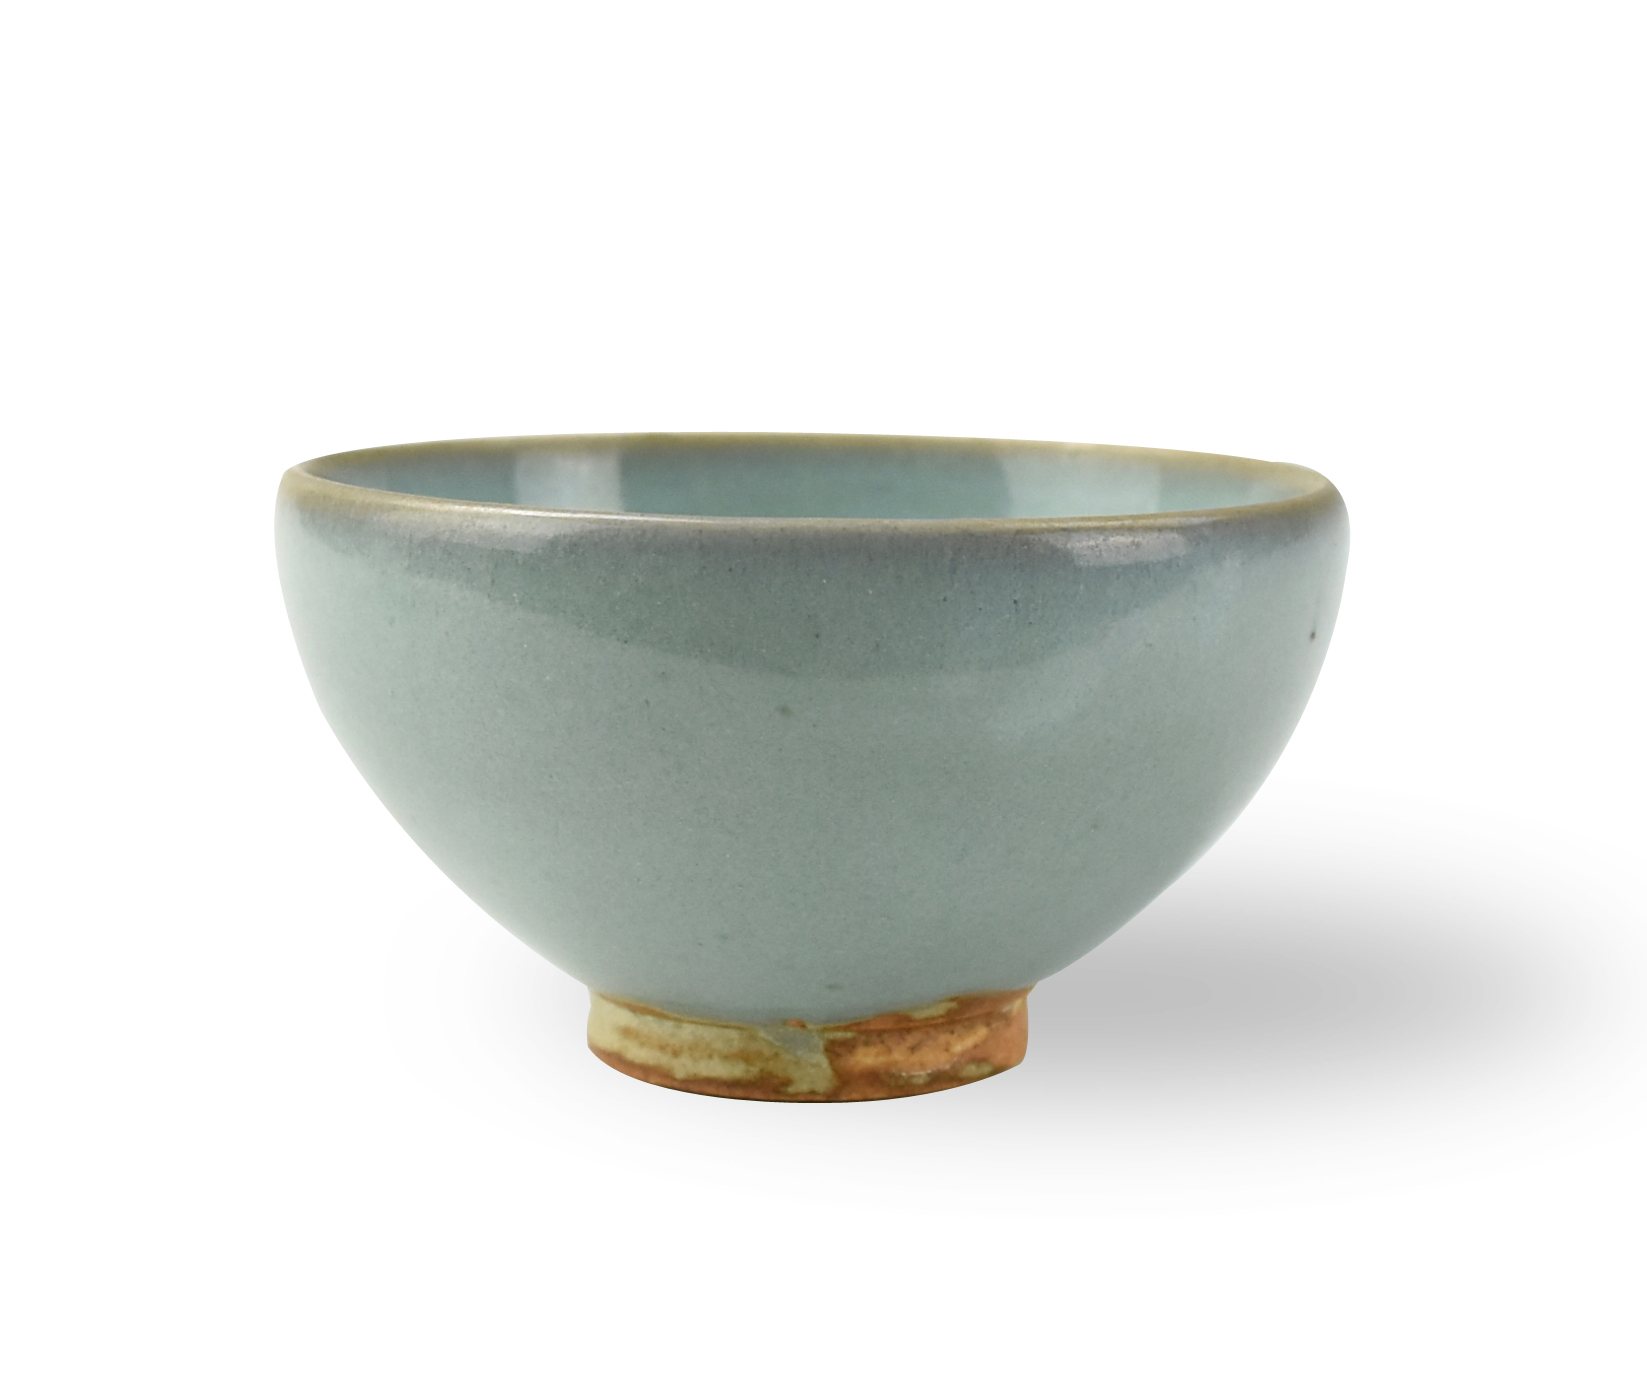 CHINESE JUN WARE BOWL SONG DYNASTY 2ce814